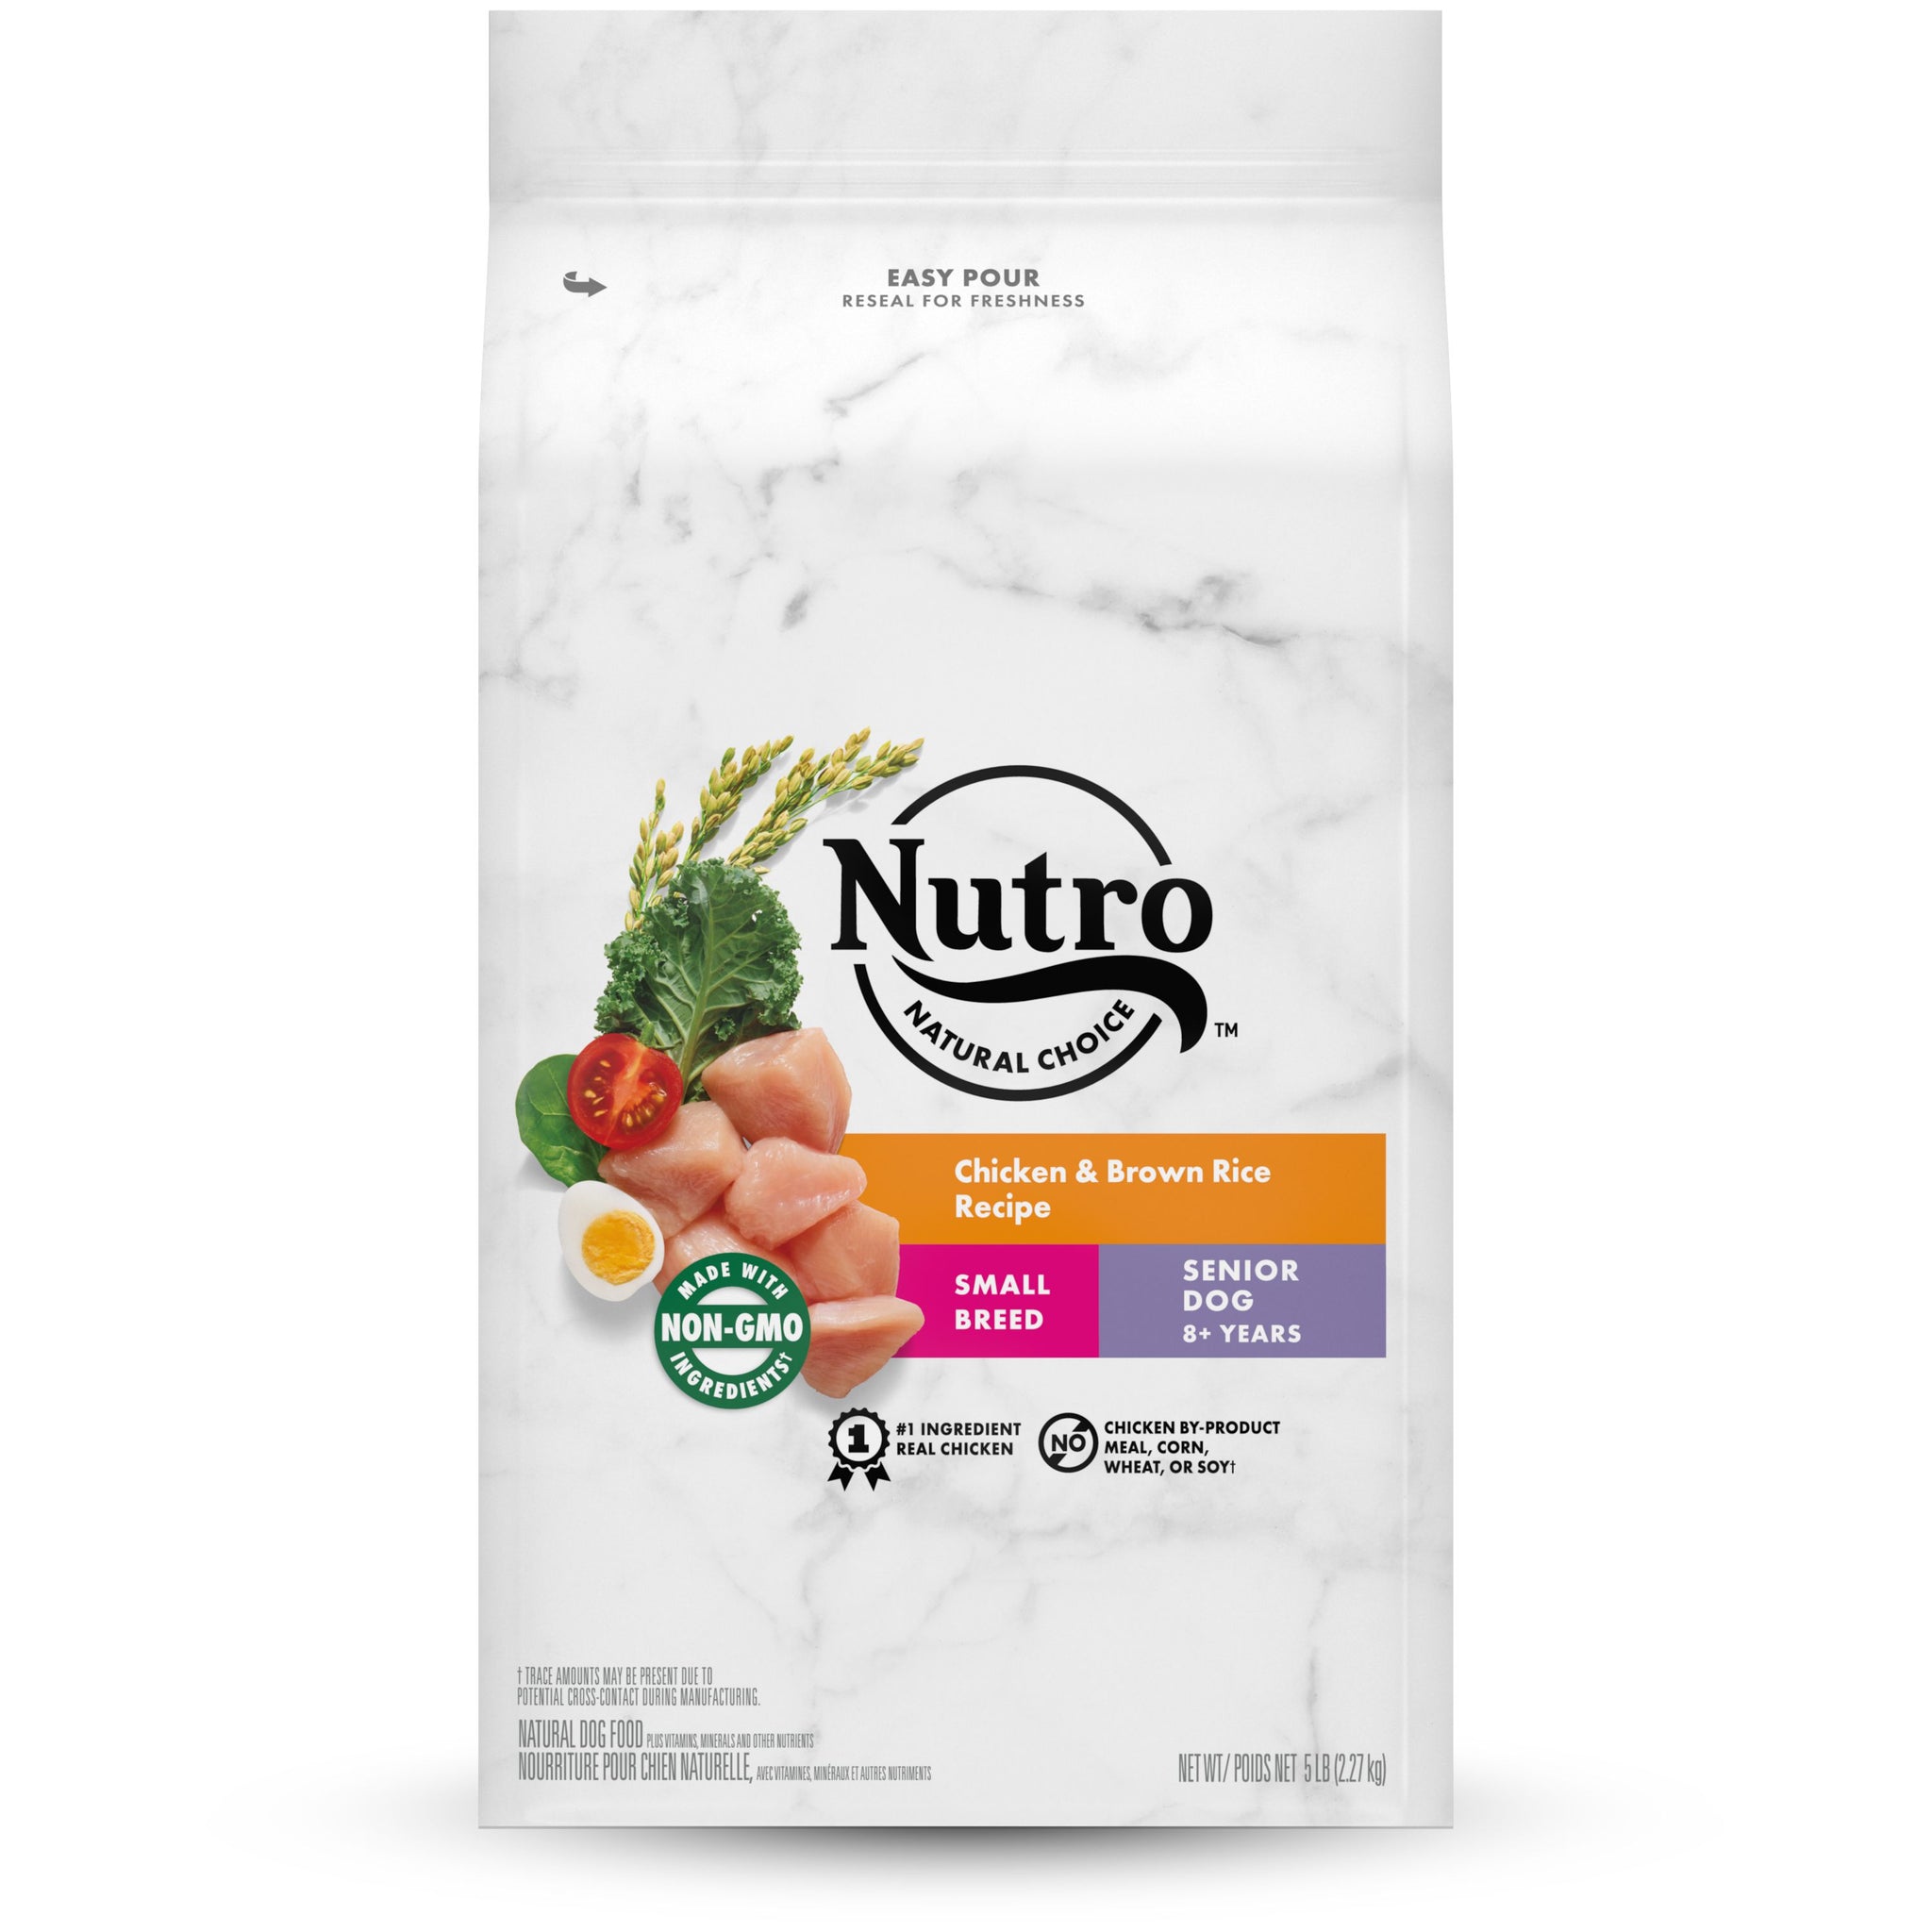 Nutro Natural Choice Senior Small Breed Chicken & Brown Rice Recipe Dry Dog Food